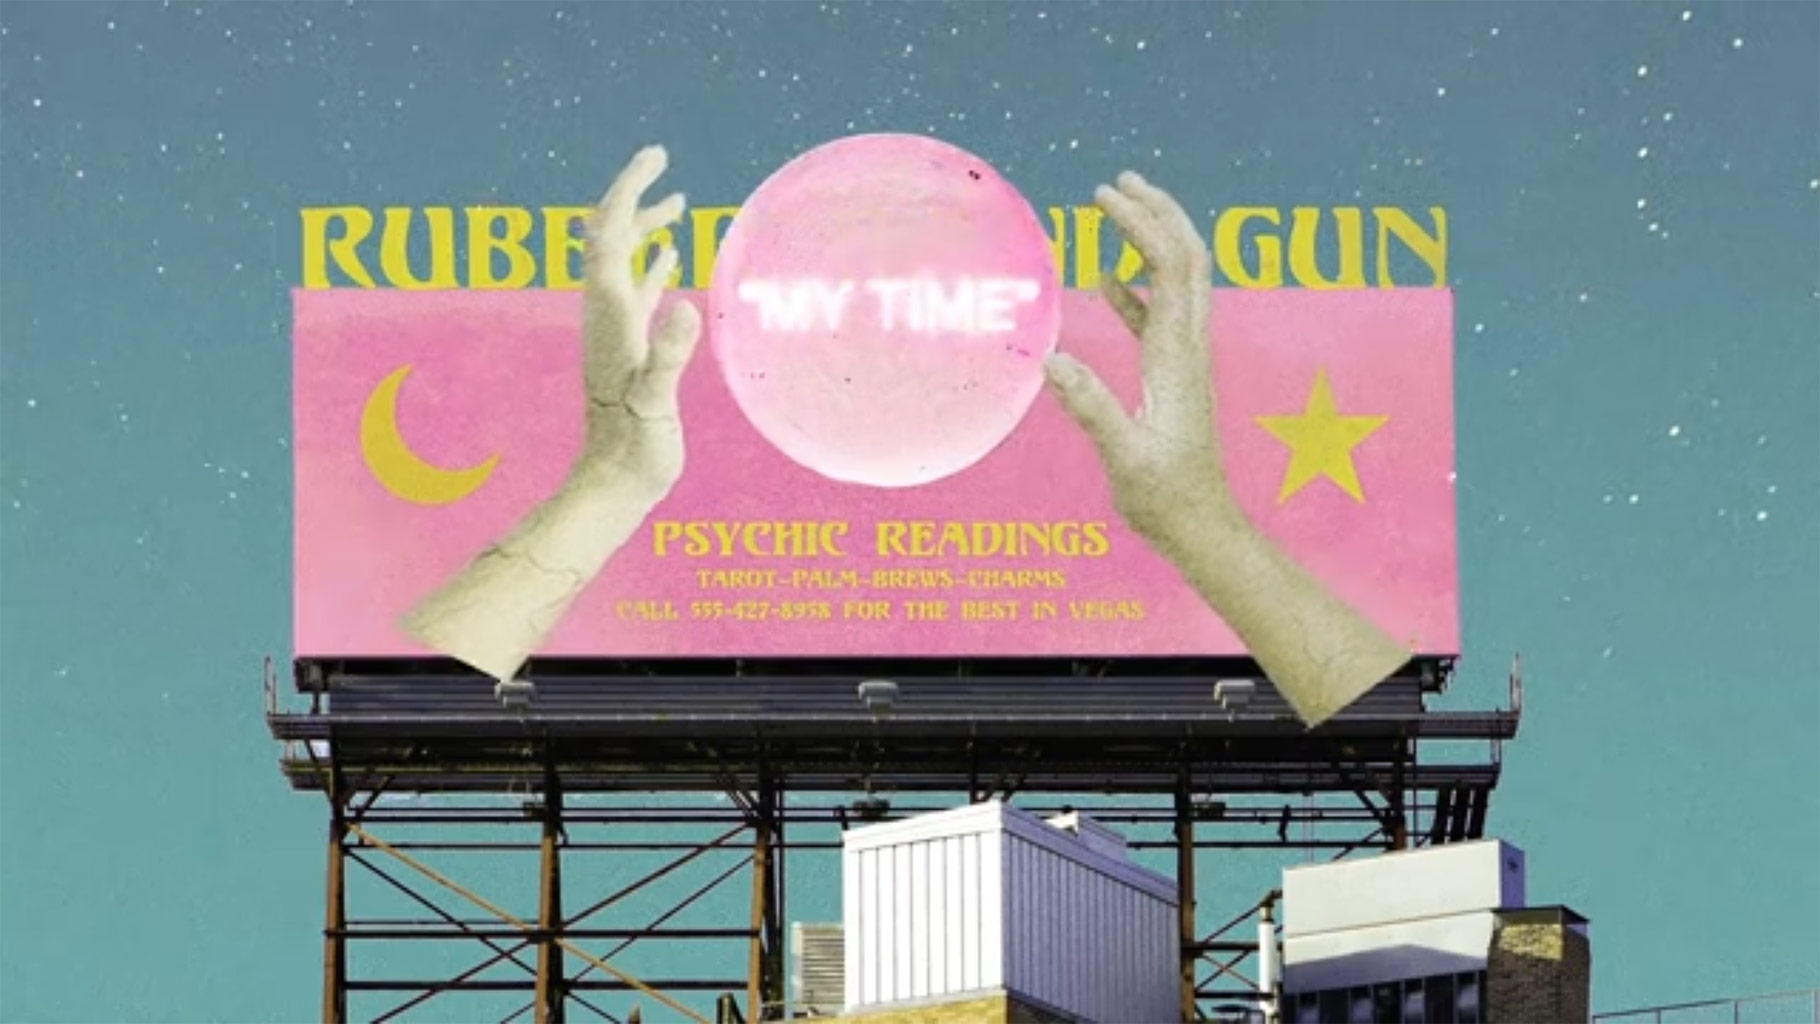 Rubber Band Gun - Cashes Out Music Video